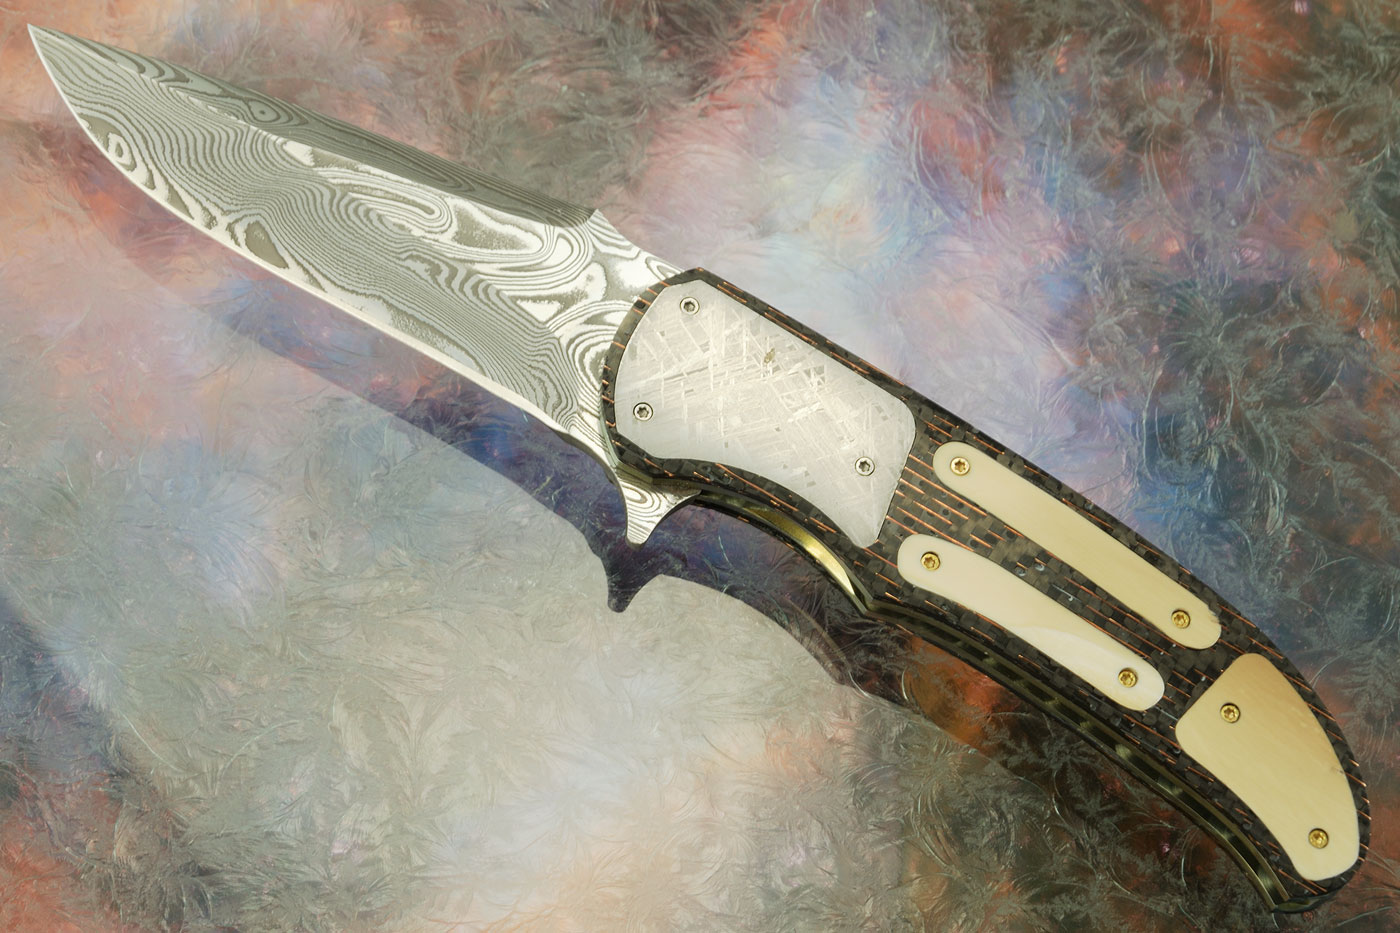 LL-CC Flipper with Copper Wire Carbon Fiber, Mammoth Ivory, and Meteorite (IKBS)